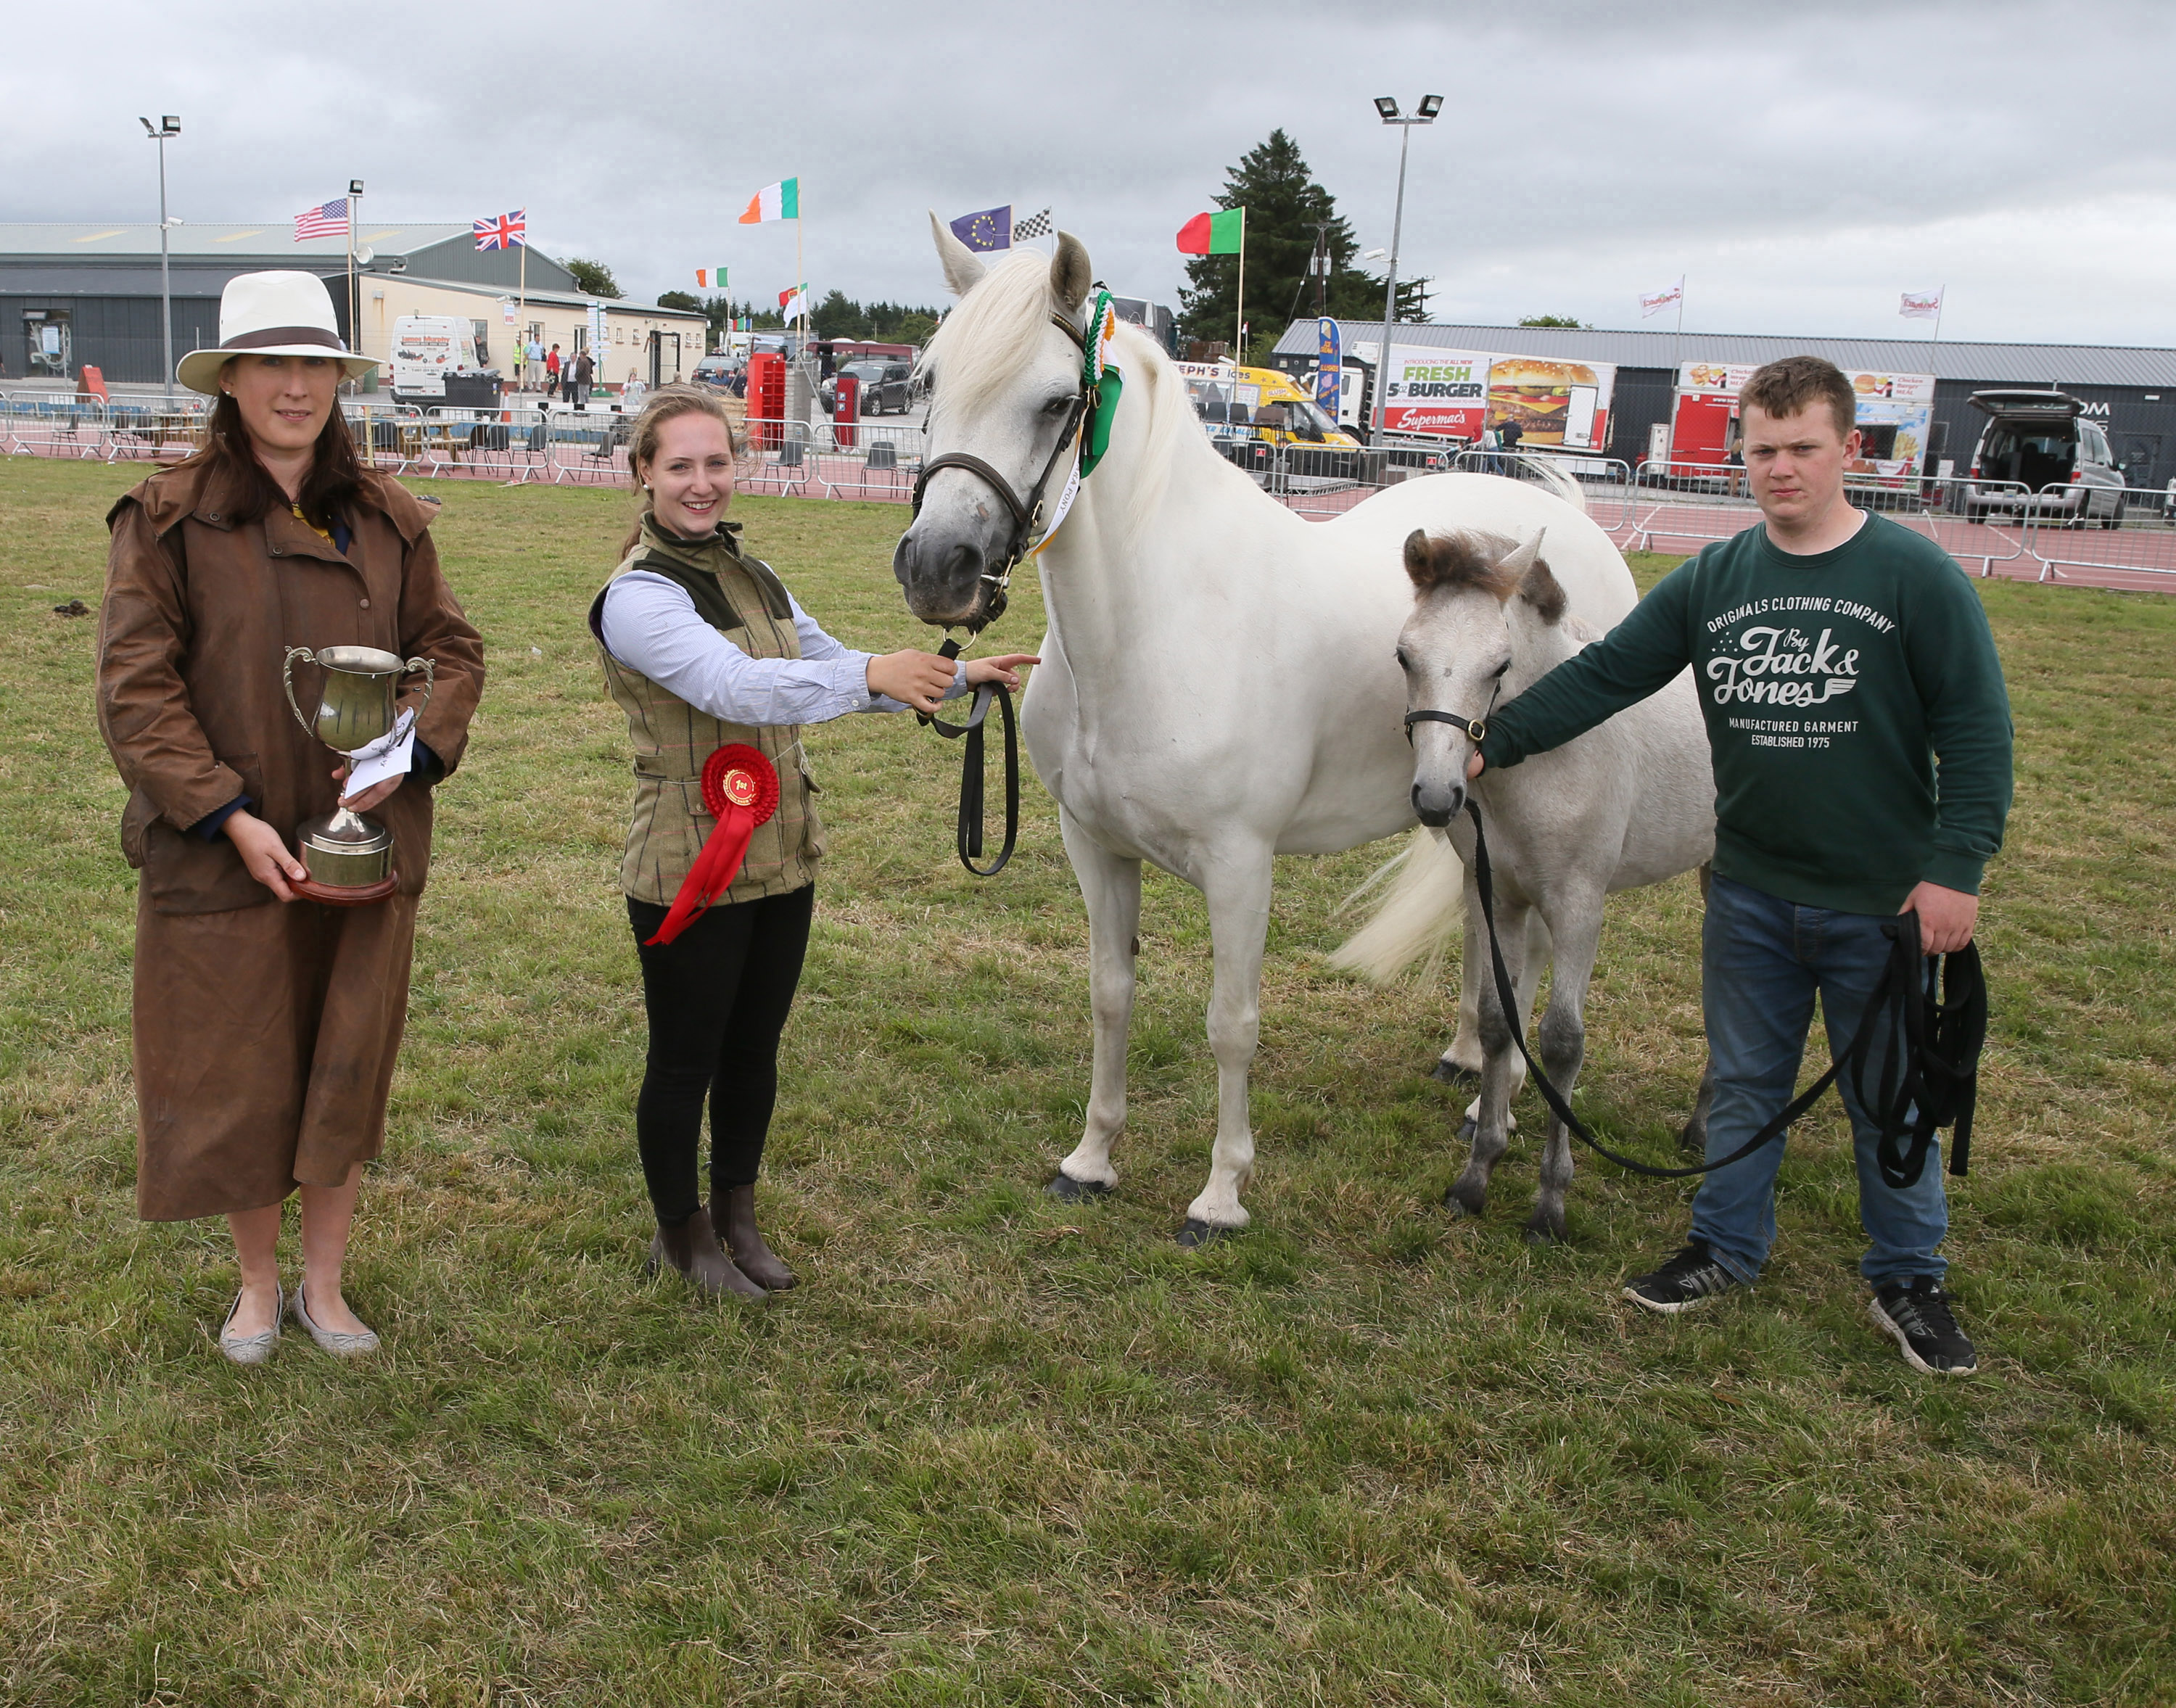 Sarah Conway, (Judge Horse Classes) with the Josie Kerin's Perpetual Cup for Champion Connemara of Show  (sponsored by Ballyhaunis Plant Hire) pictured with Rachel Byrne (granddaughter of Jarlath Grogan, Bekan Claremorris) and Mark Byrne, Tuam. Photo © Michael Donnelly